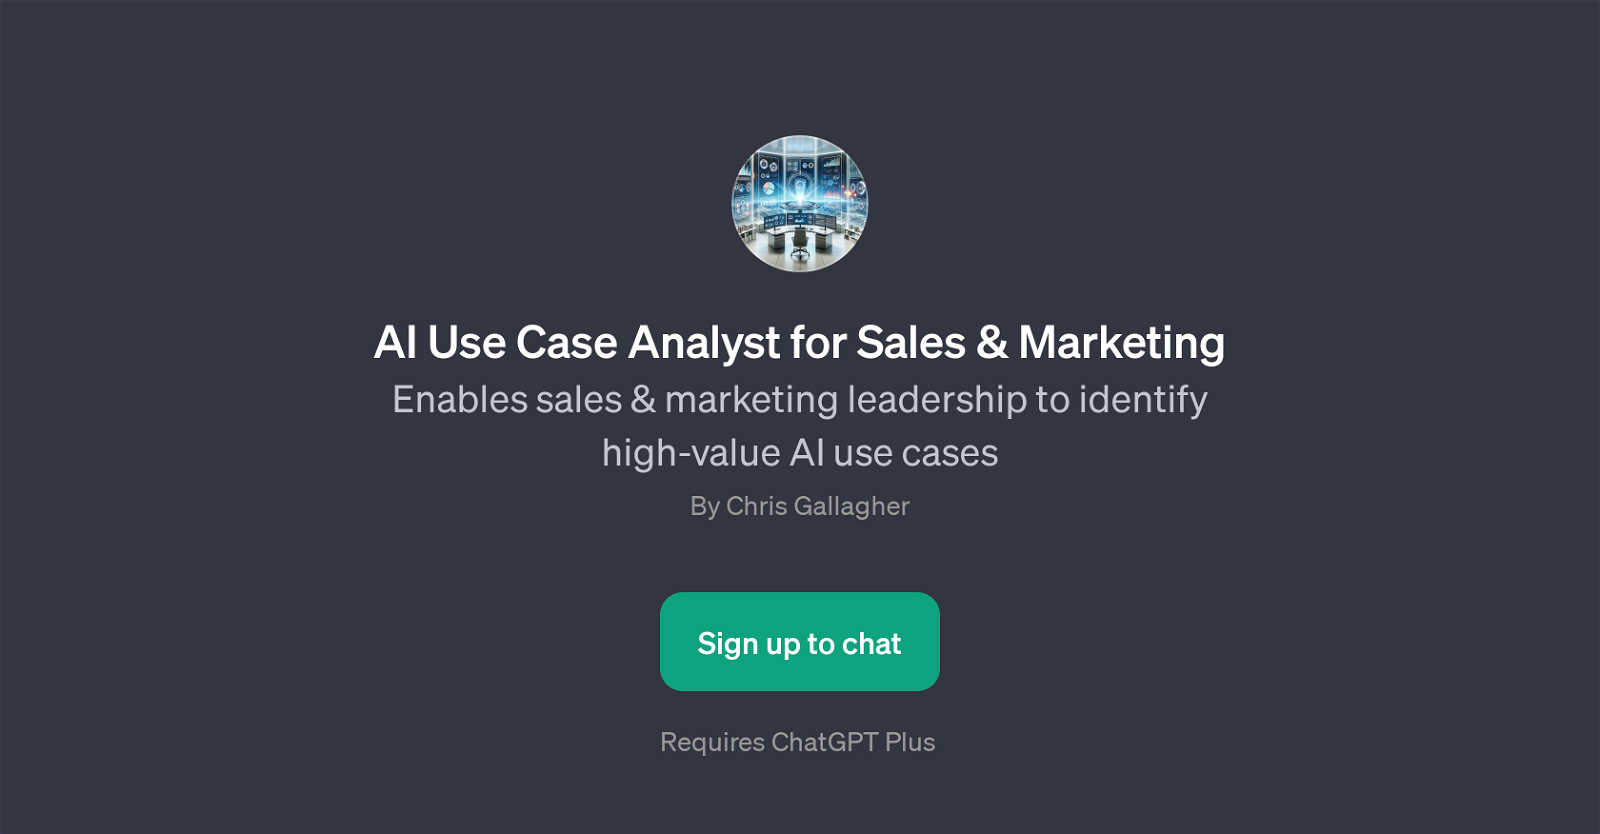 AI Use Case Analyst for Sales & Marketing website